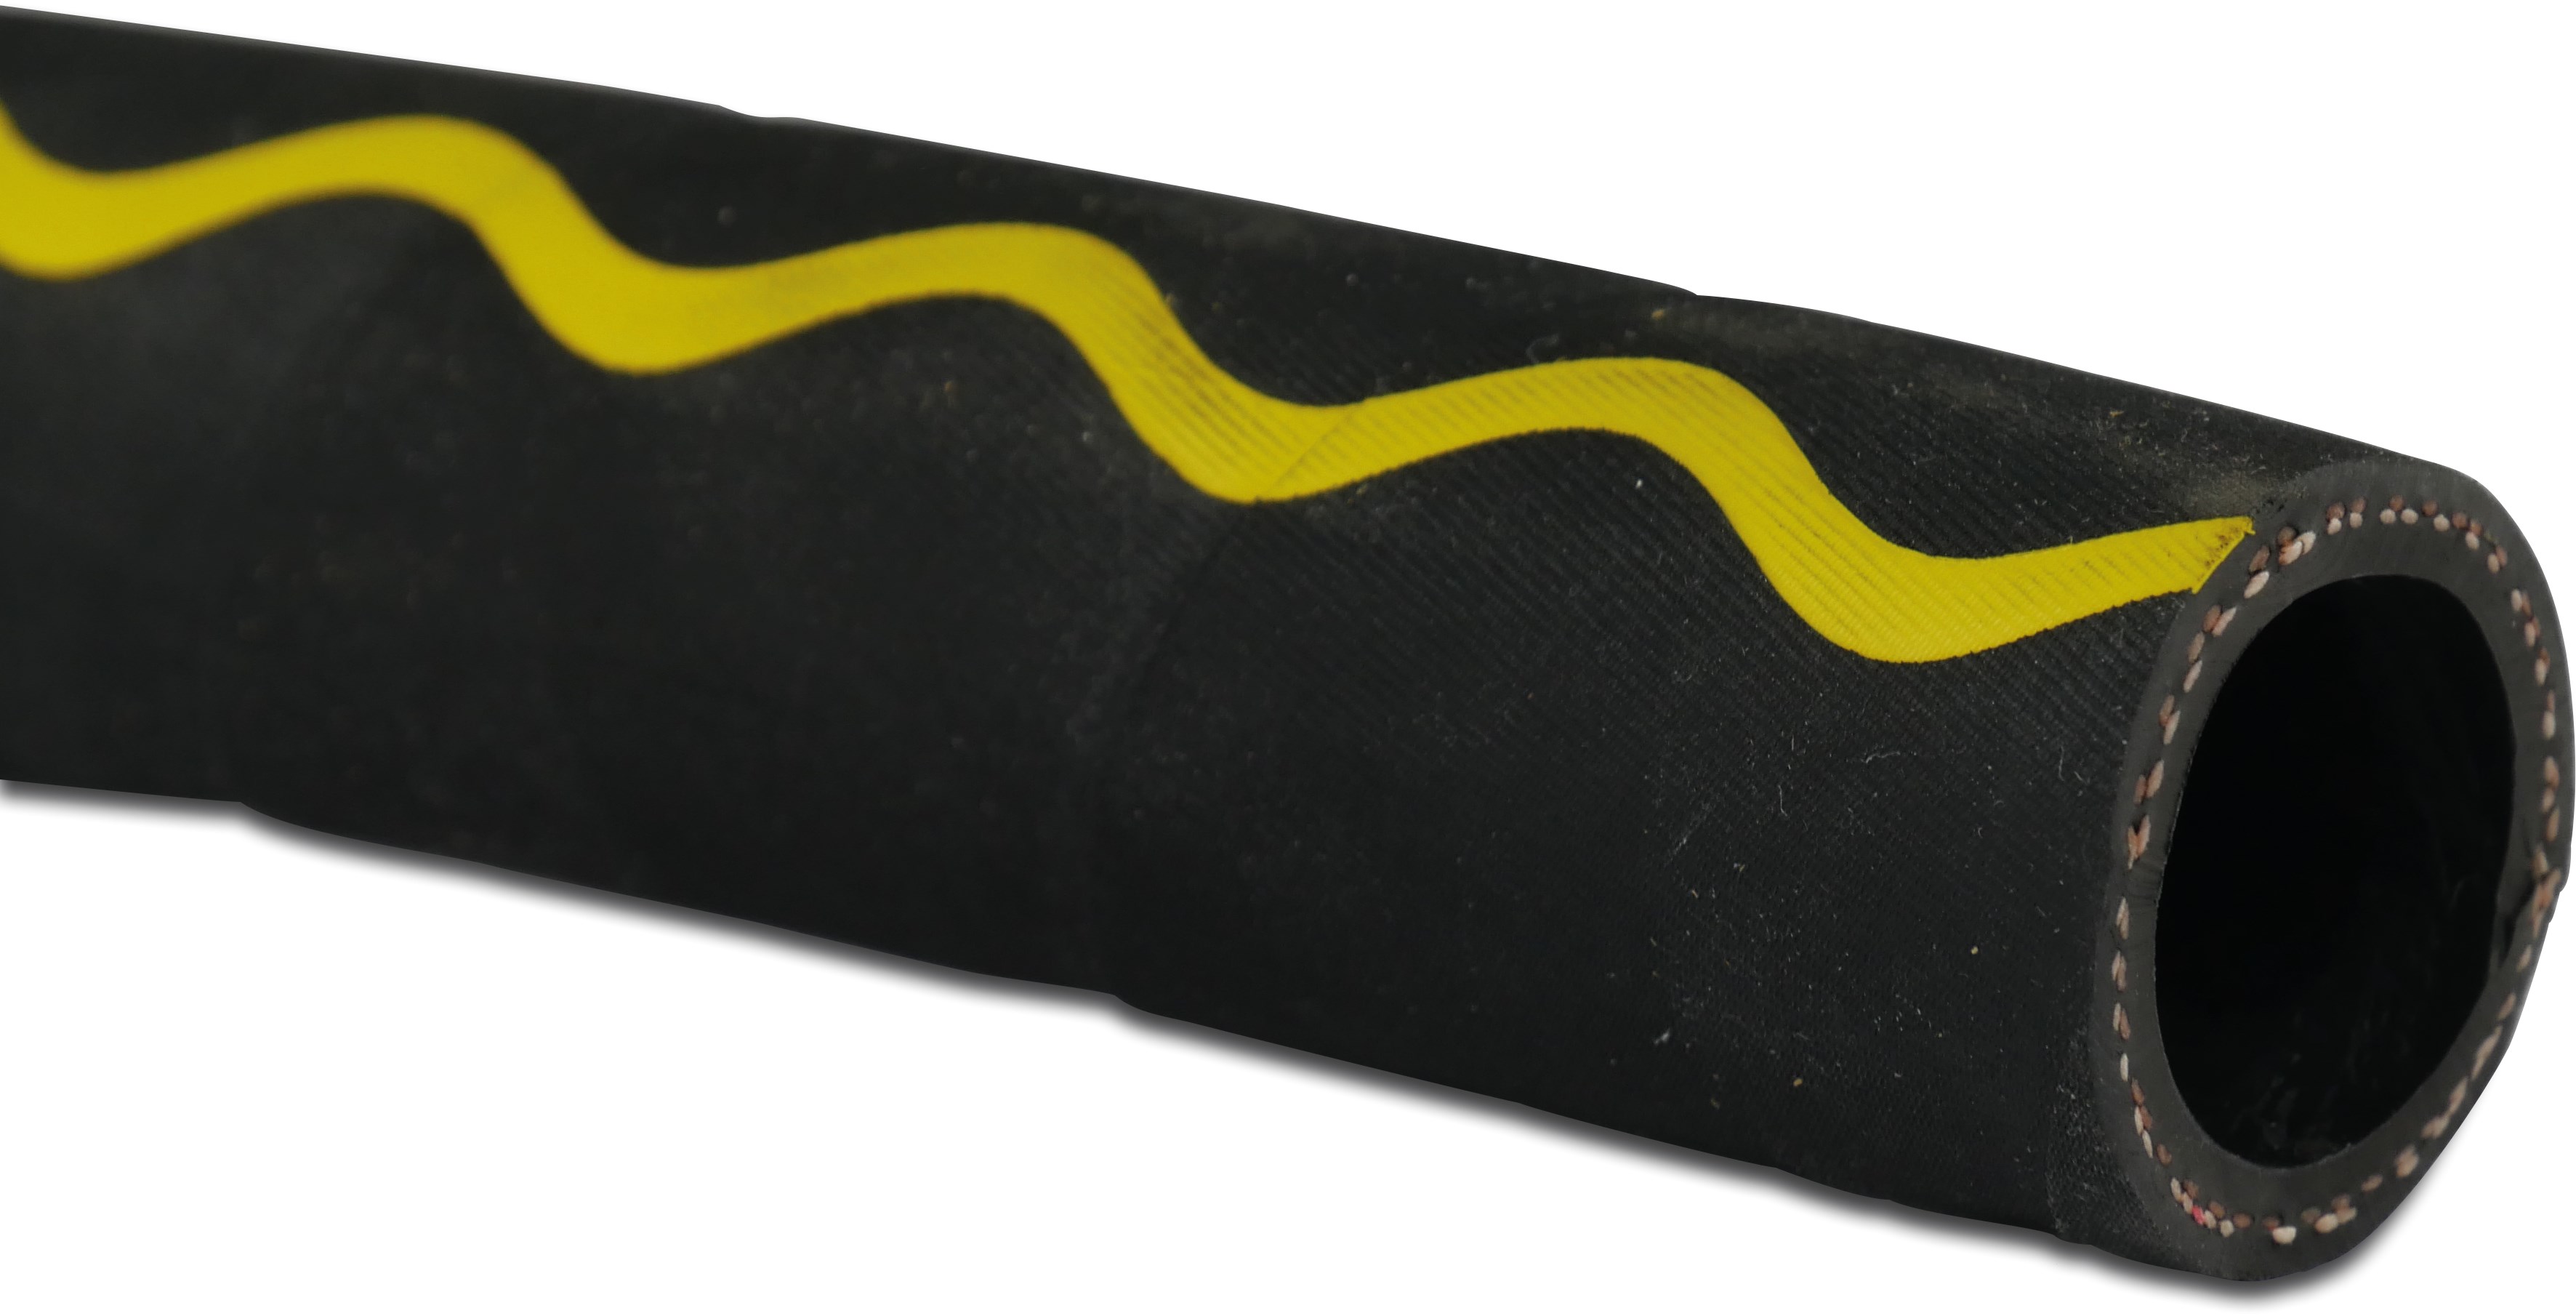 Continental Rubber hose EPDM 13 mm x 20,8 mm x 3,9 mm 30bar black/yellow 40m type Gold Snake